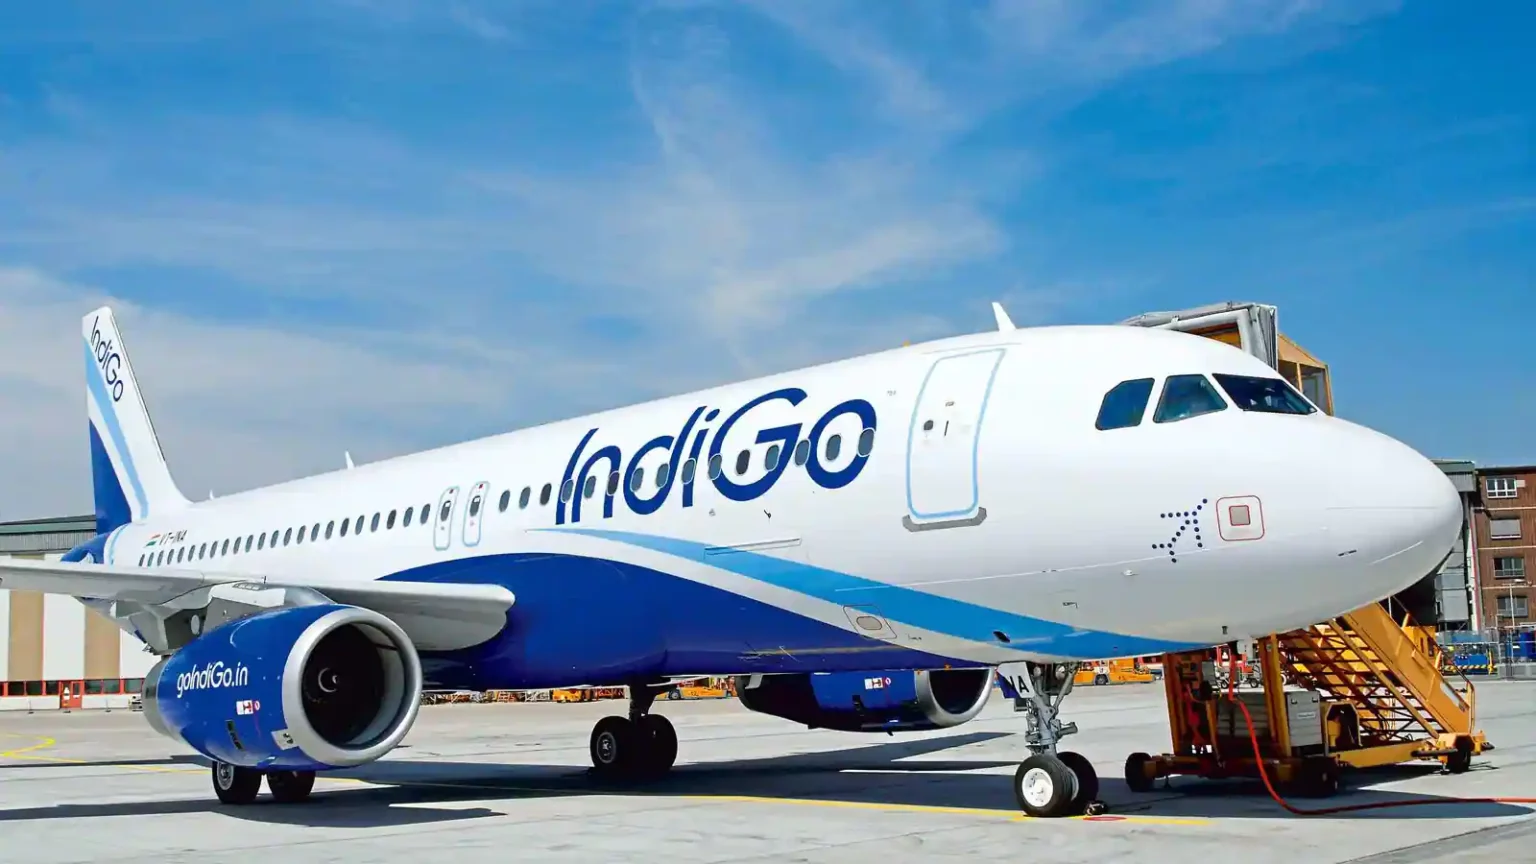 Indigo staff denies flight access to specially-abled child - Asiana Times